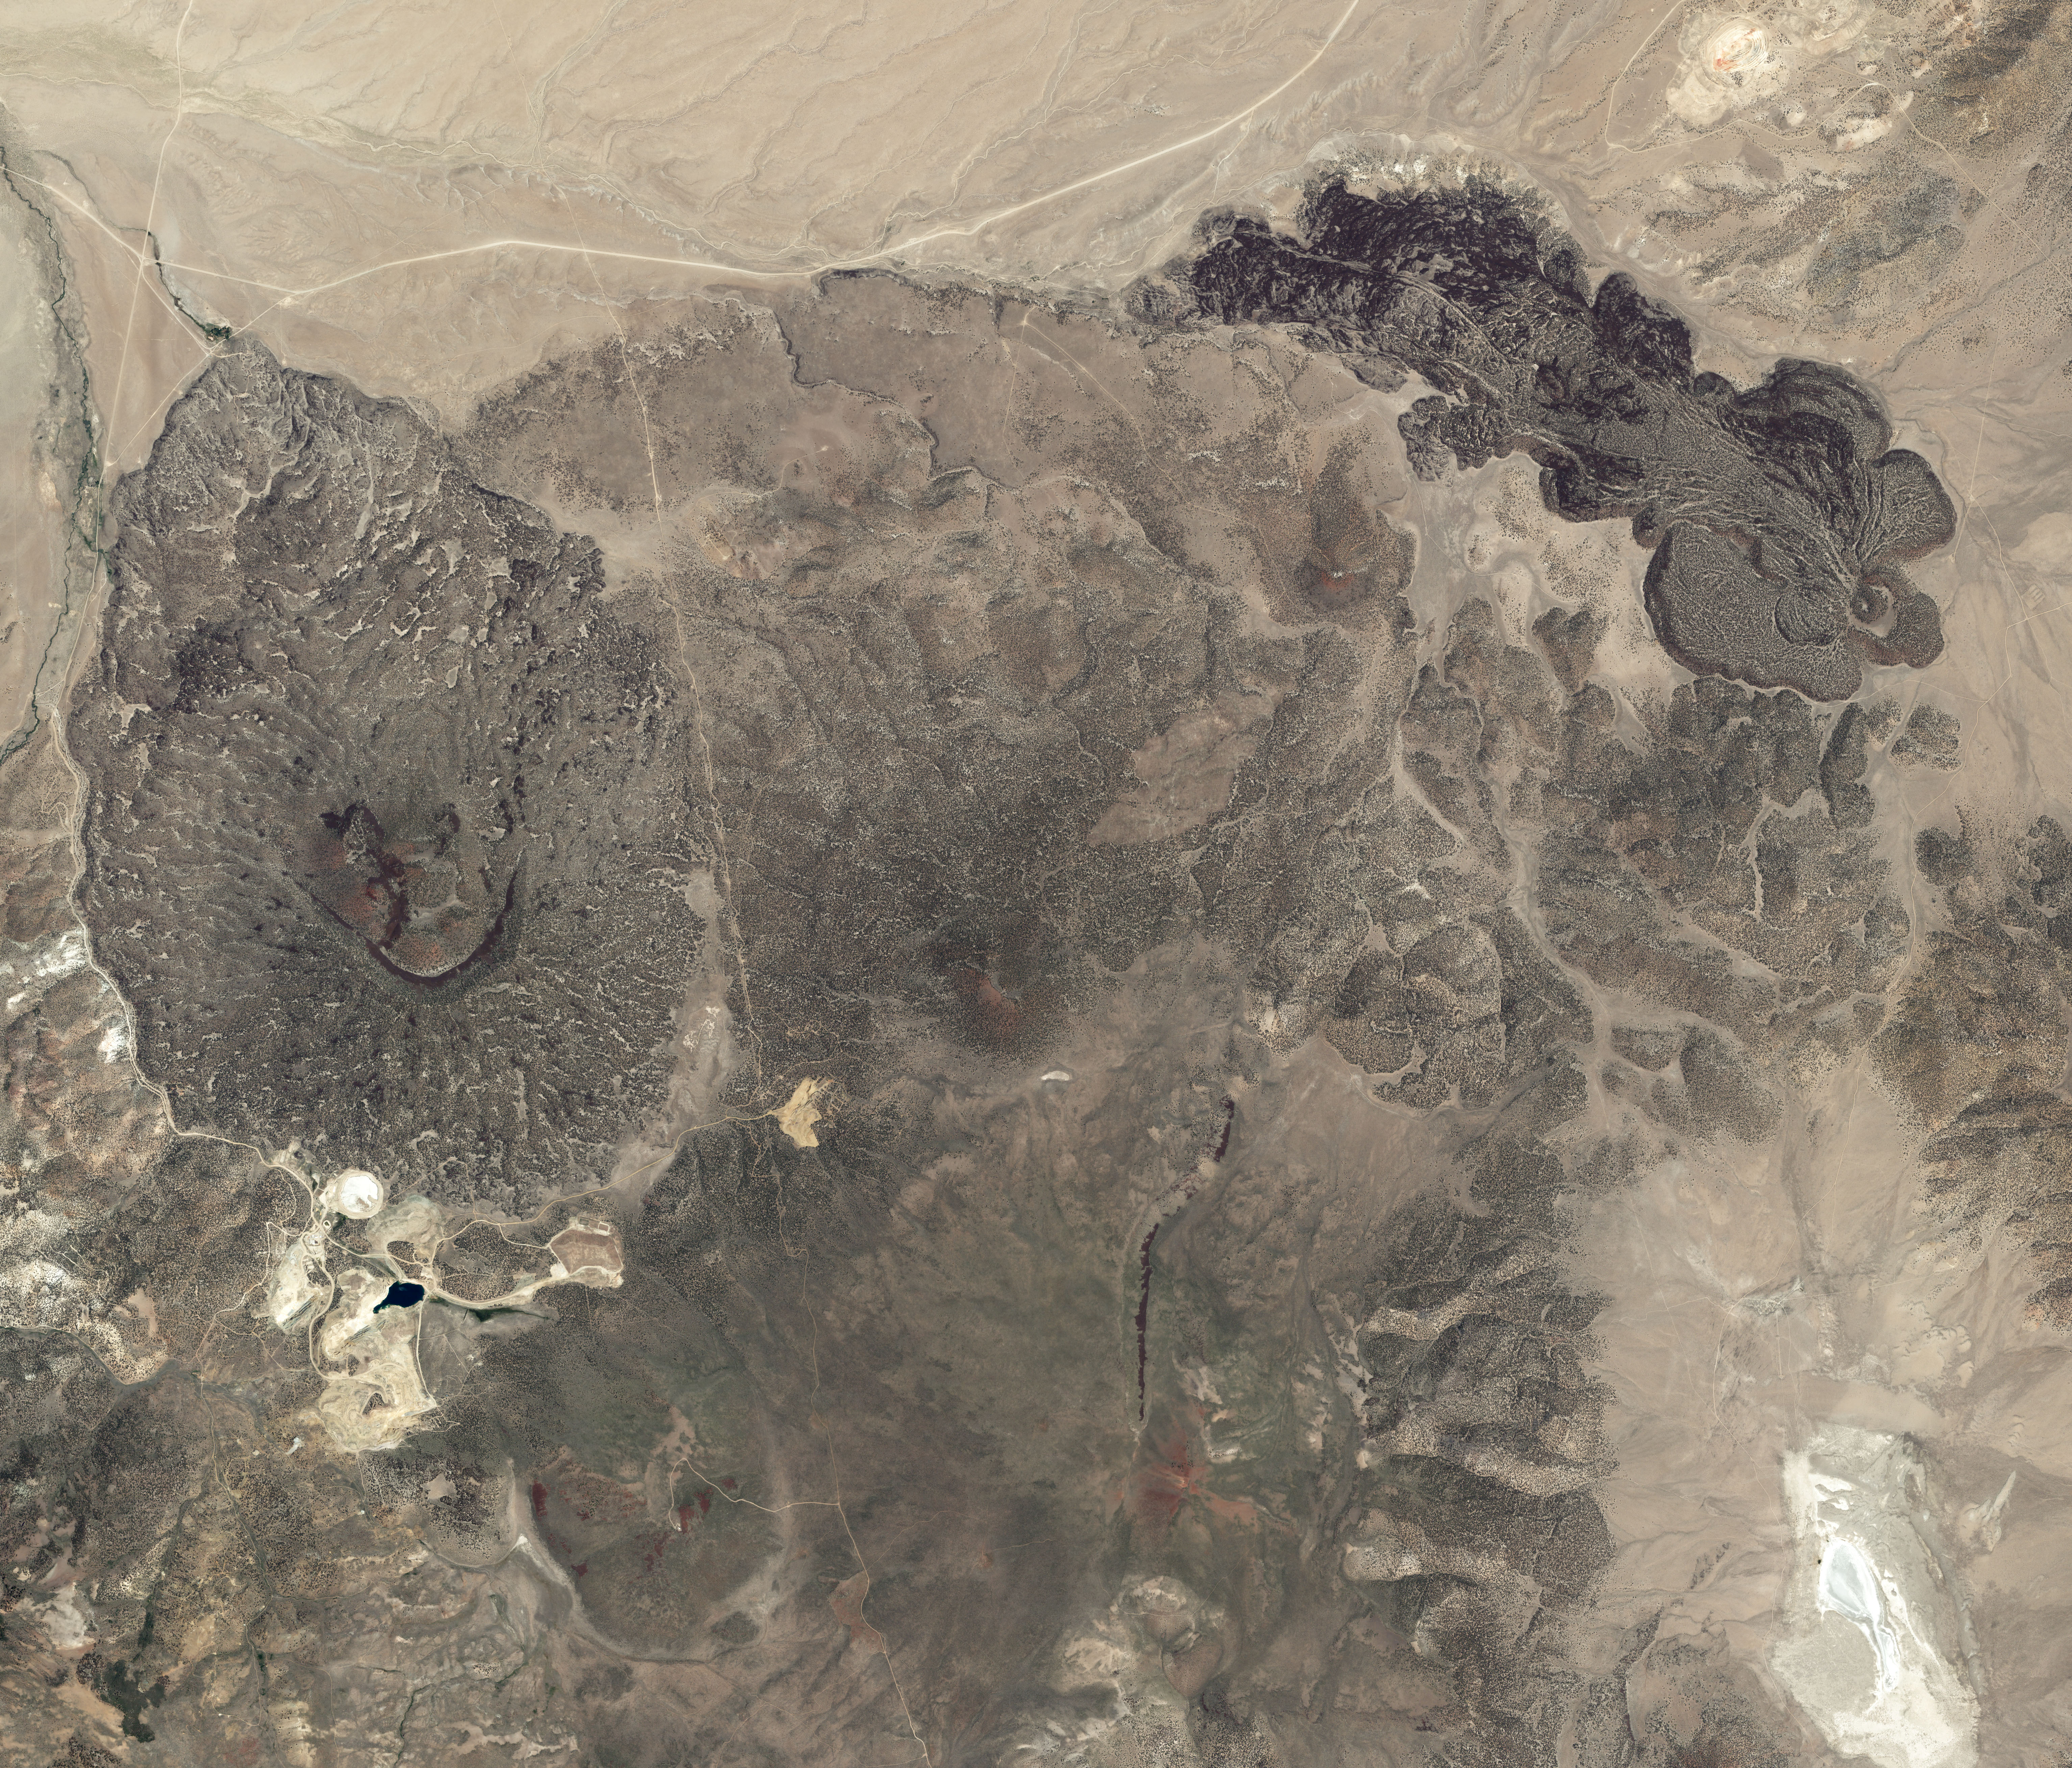 Mud Springs Volcano, Nevada - related image preview